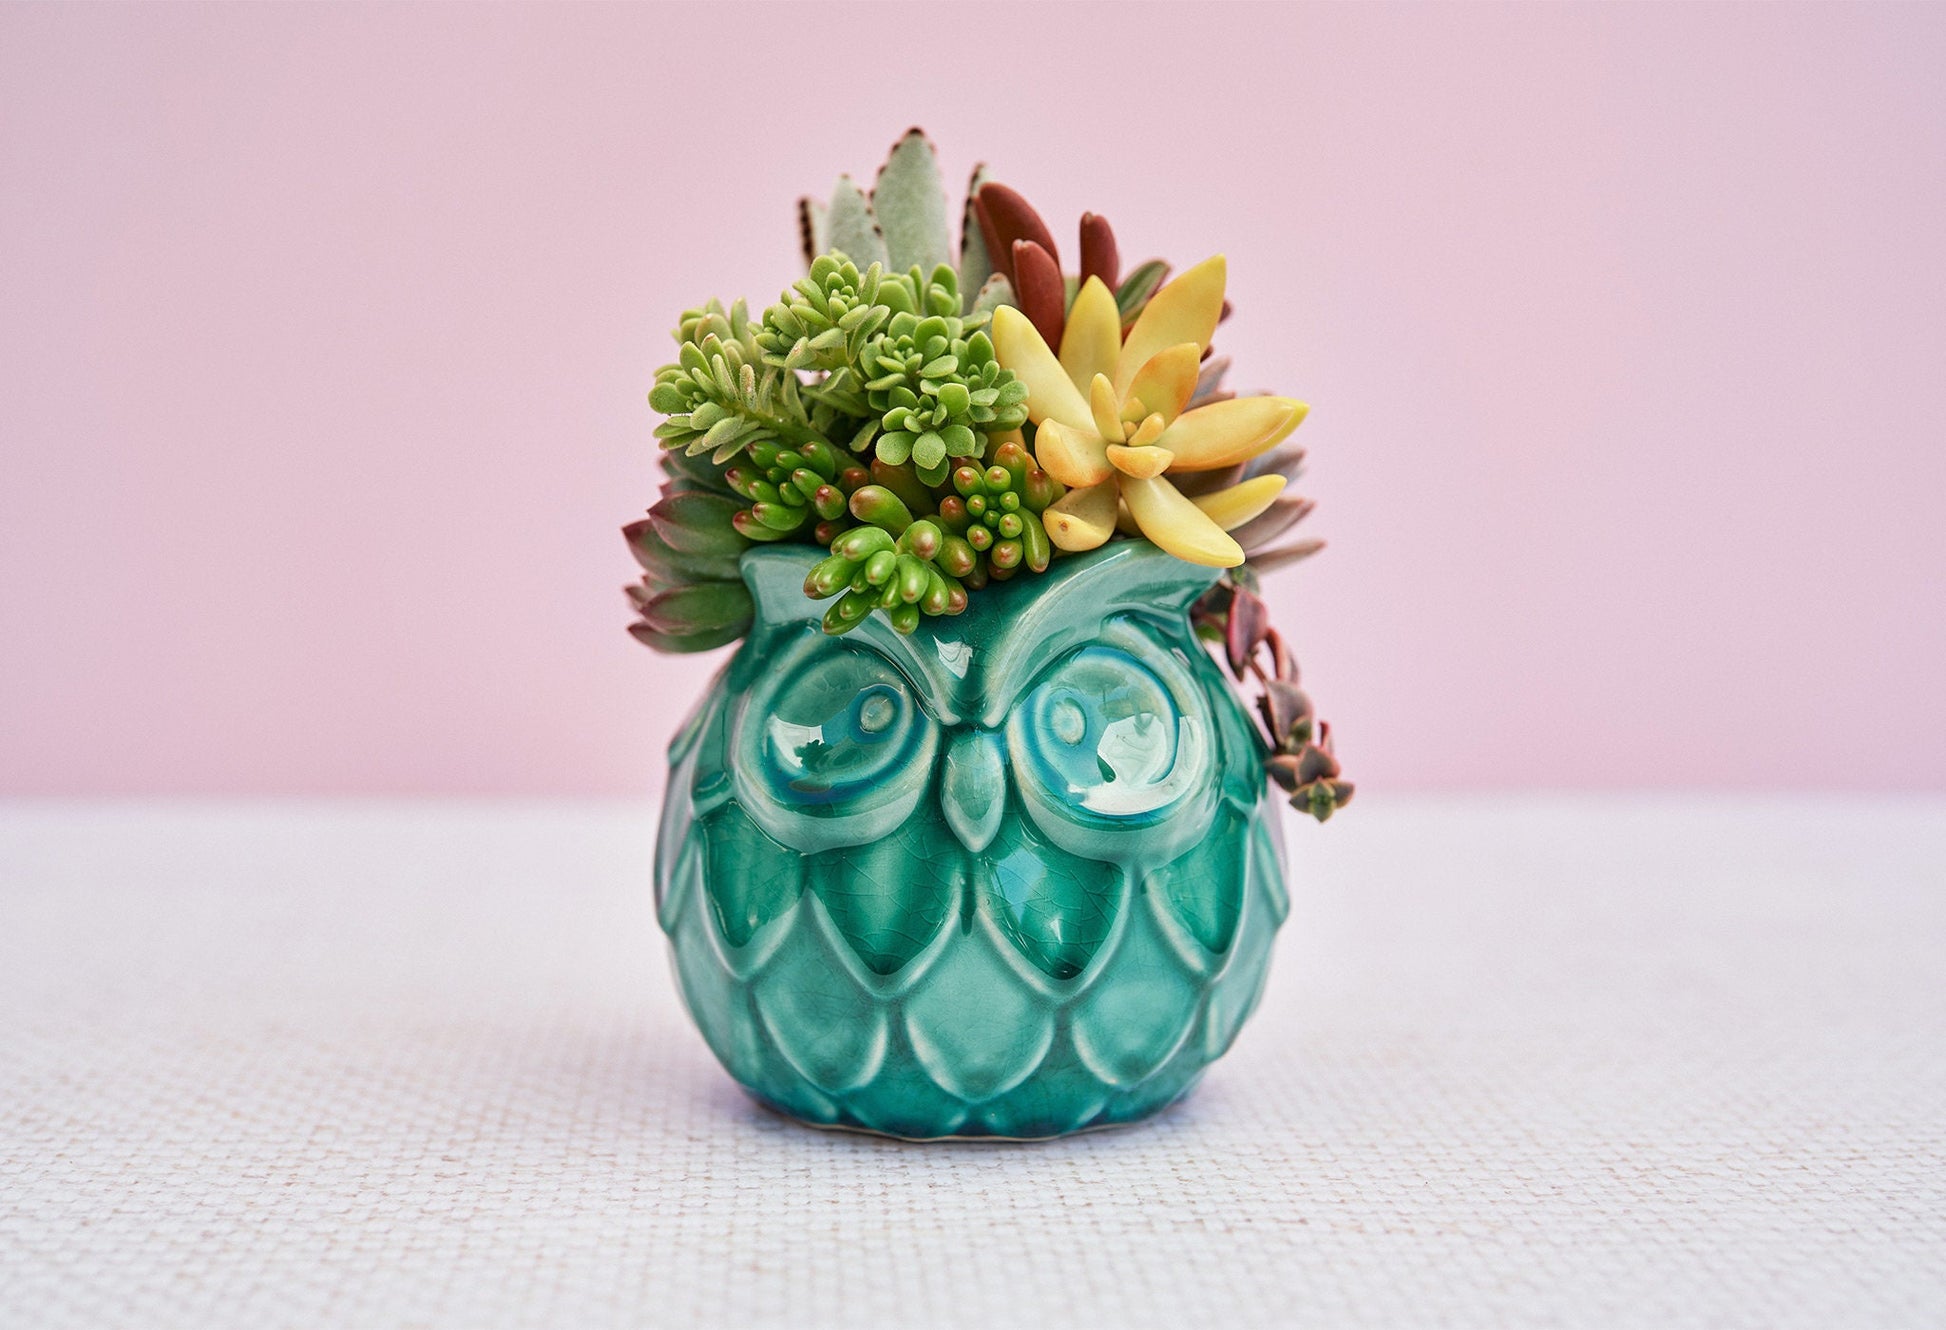 Teal Owl Succulent Arrangement Gift | Birthday, Celebration, Sympathy, House Warming Living Gift for Plant Lovers | Gift for Mom